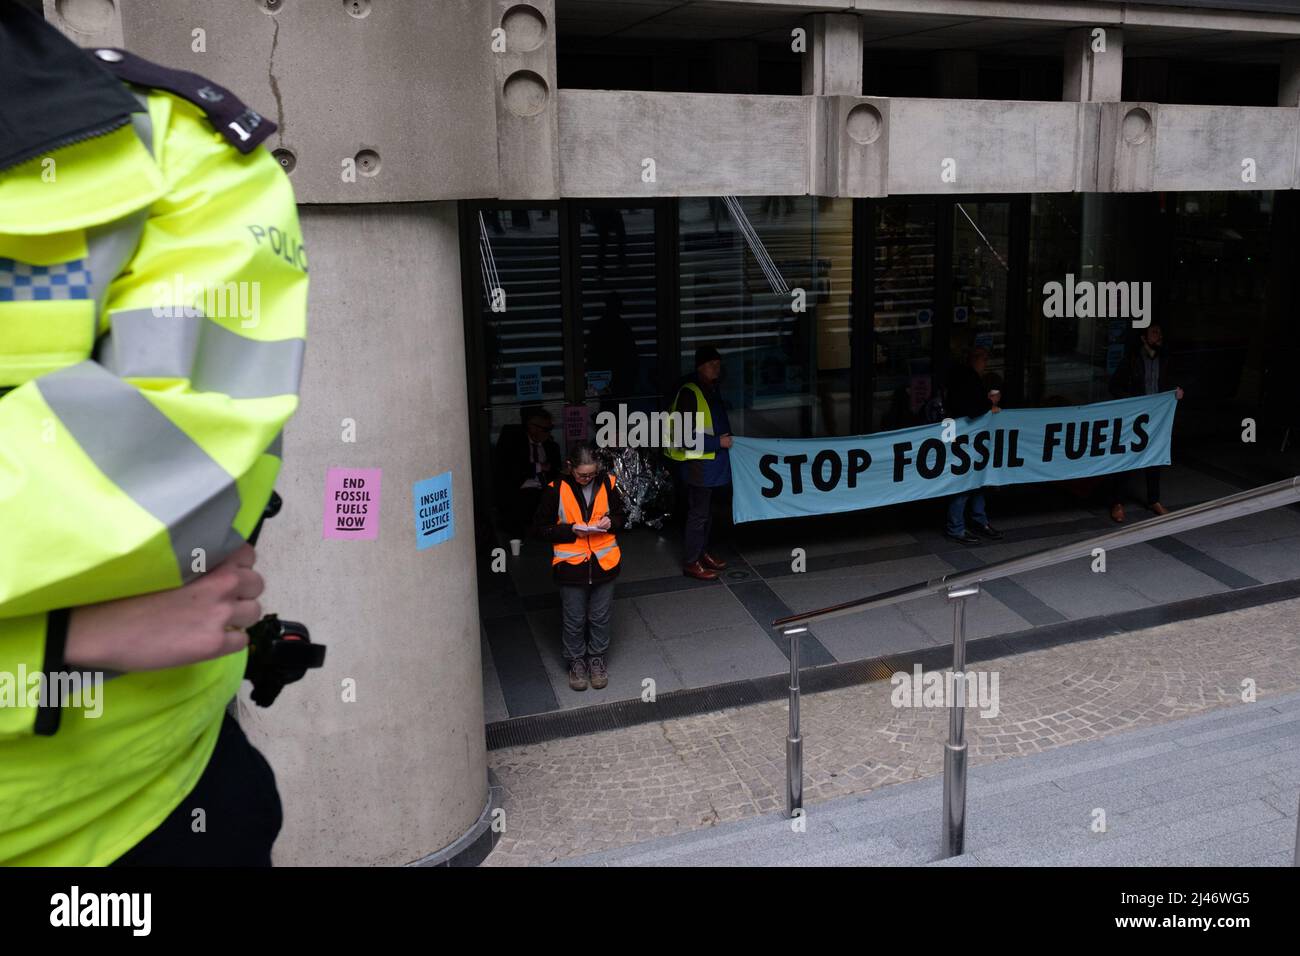 London, UK. 12th Apr, 2022. 40 Extinction Rebellion (XR) activists blocked all entrances to Lloyds of London, shutting the building for the day. Lloyd's of London insures 40% of the world's coal, oil and gas projects. XR is demanding they stop insuring fossil fuels. Today was part of a week long wave of protests and civil disobedience actions to demand an immediate stop to all new fossil fuel infrastructure by the British government amid the climate crisis and ecological emergency. Stock Photo